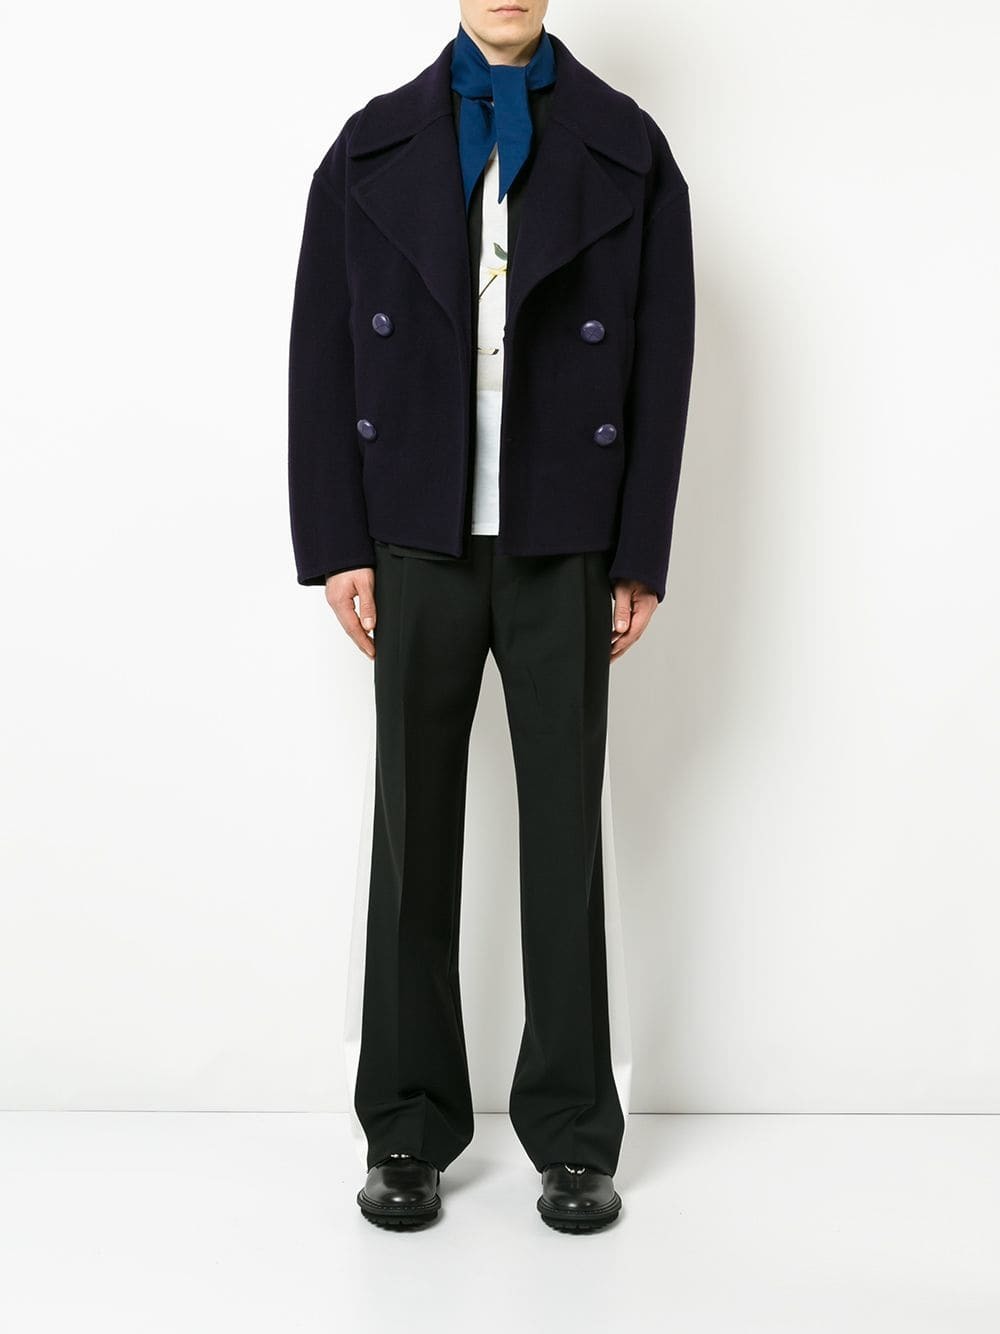 JW Anderson Oversized Cropped Peacoat, $1,039 | farfetch.com